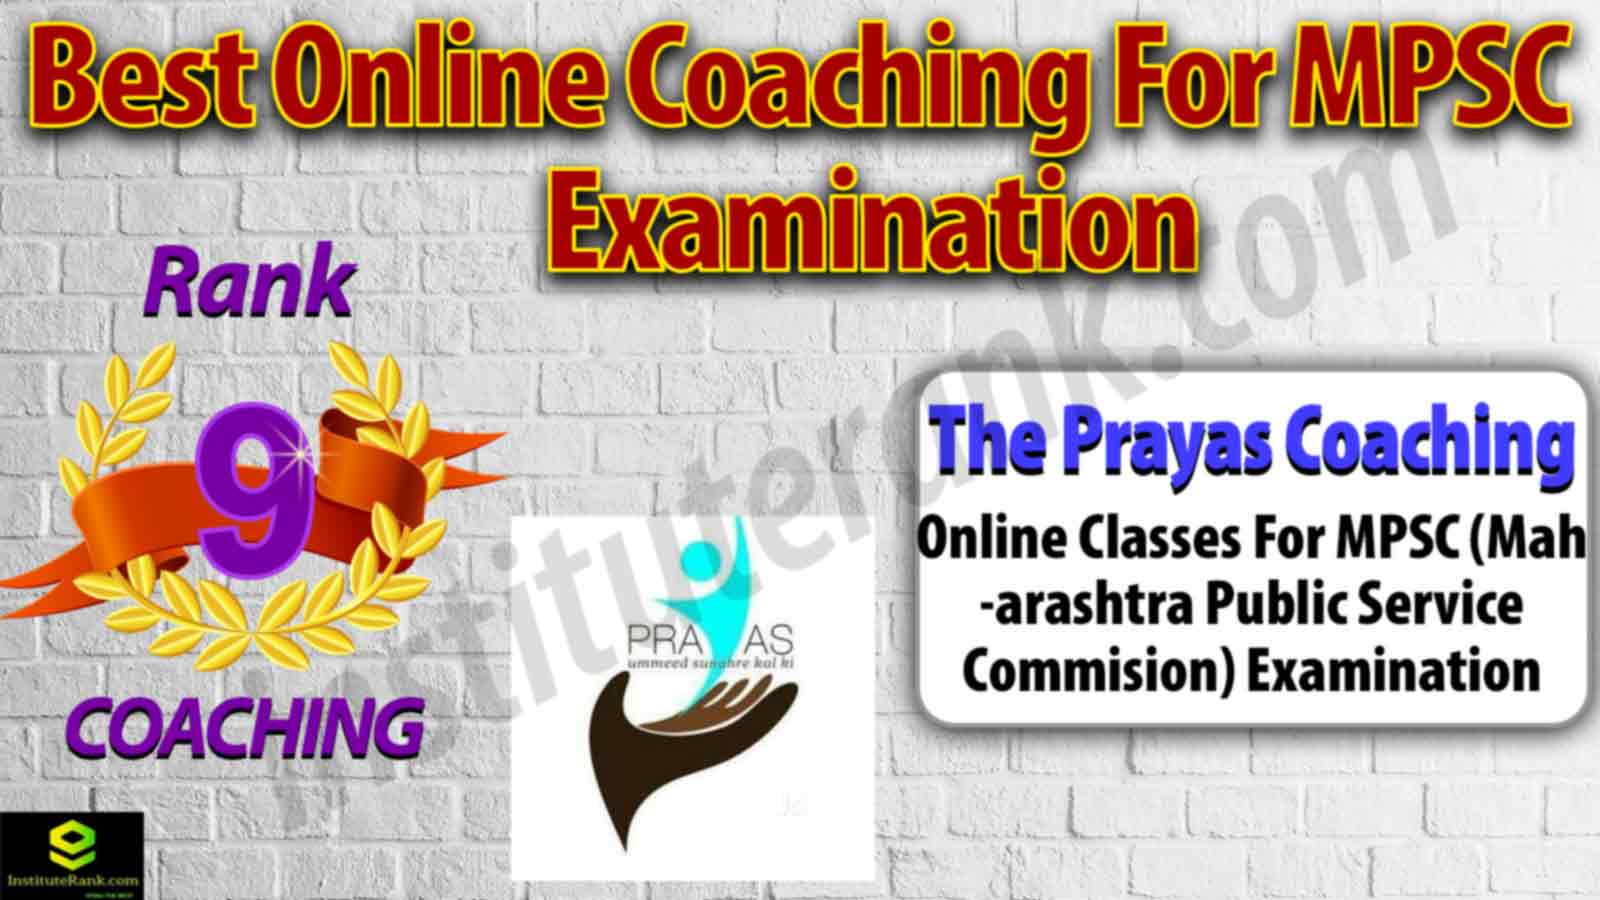 Best Online Coaching for MPSC Exam Preparation